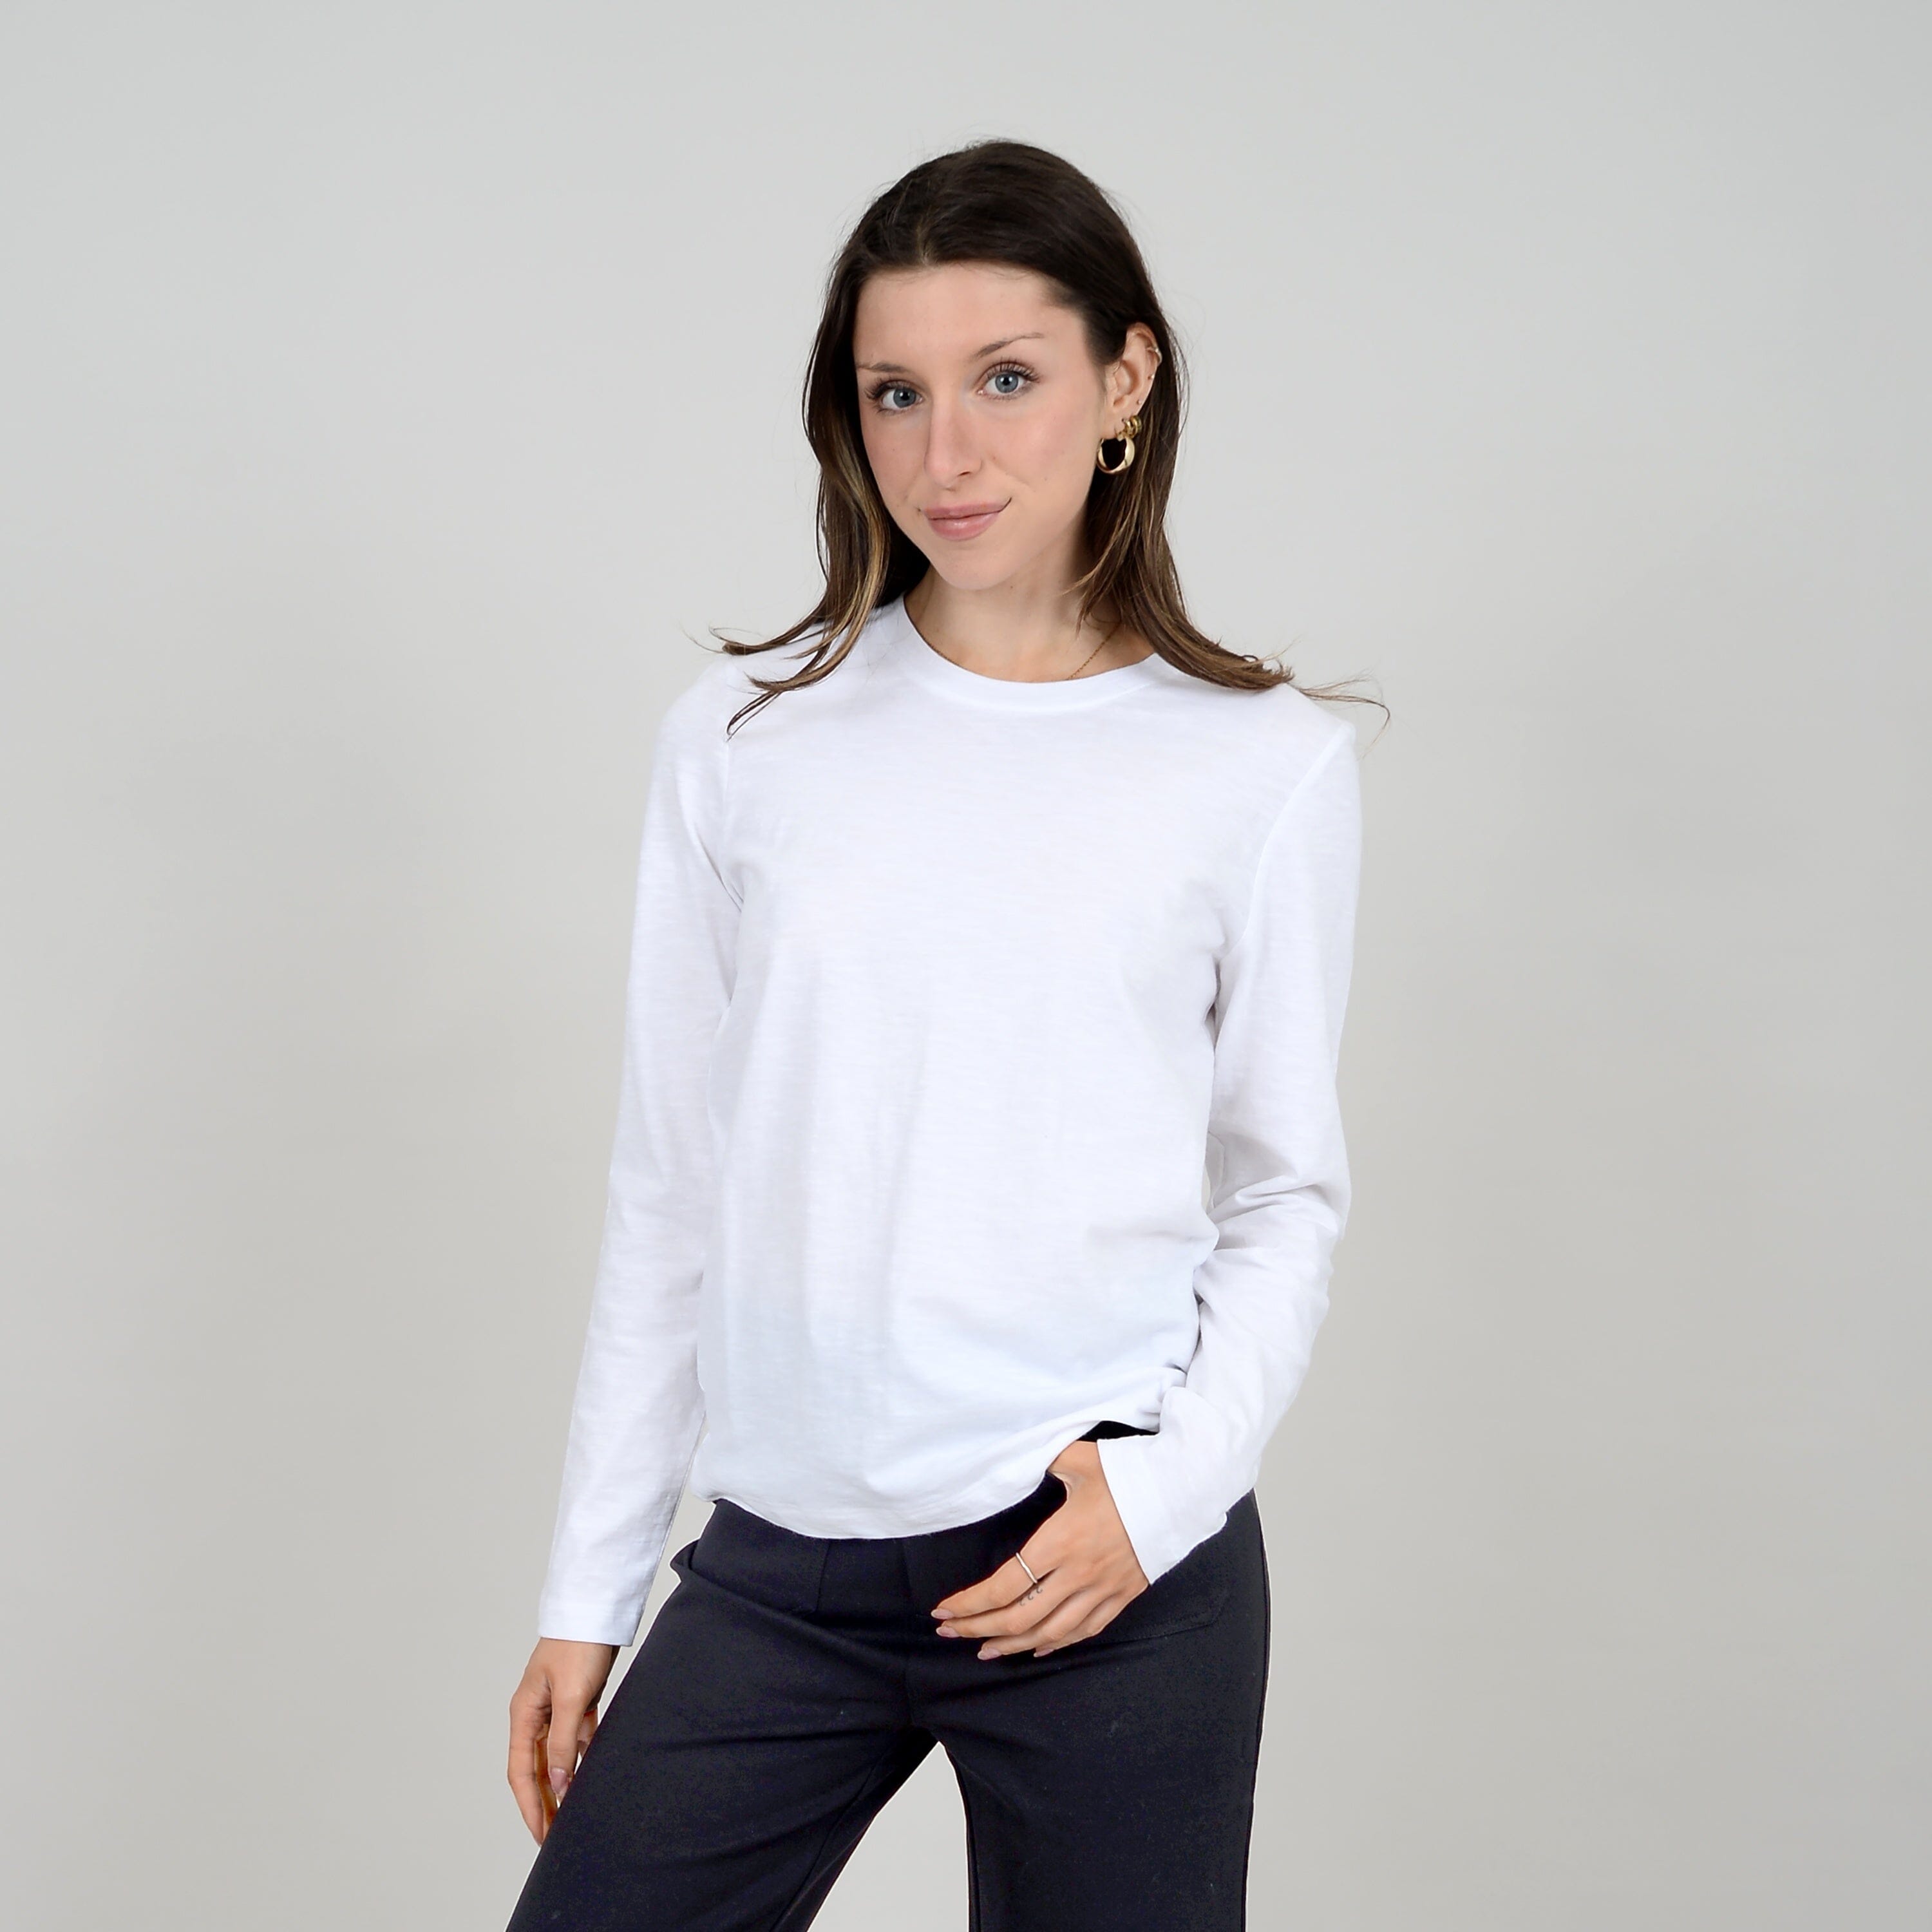 WHITE CREW NECK LONG SLEEVE Top RD STYLE 